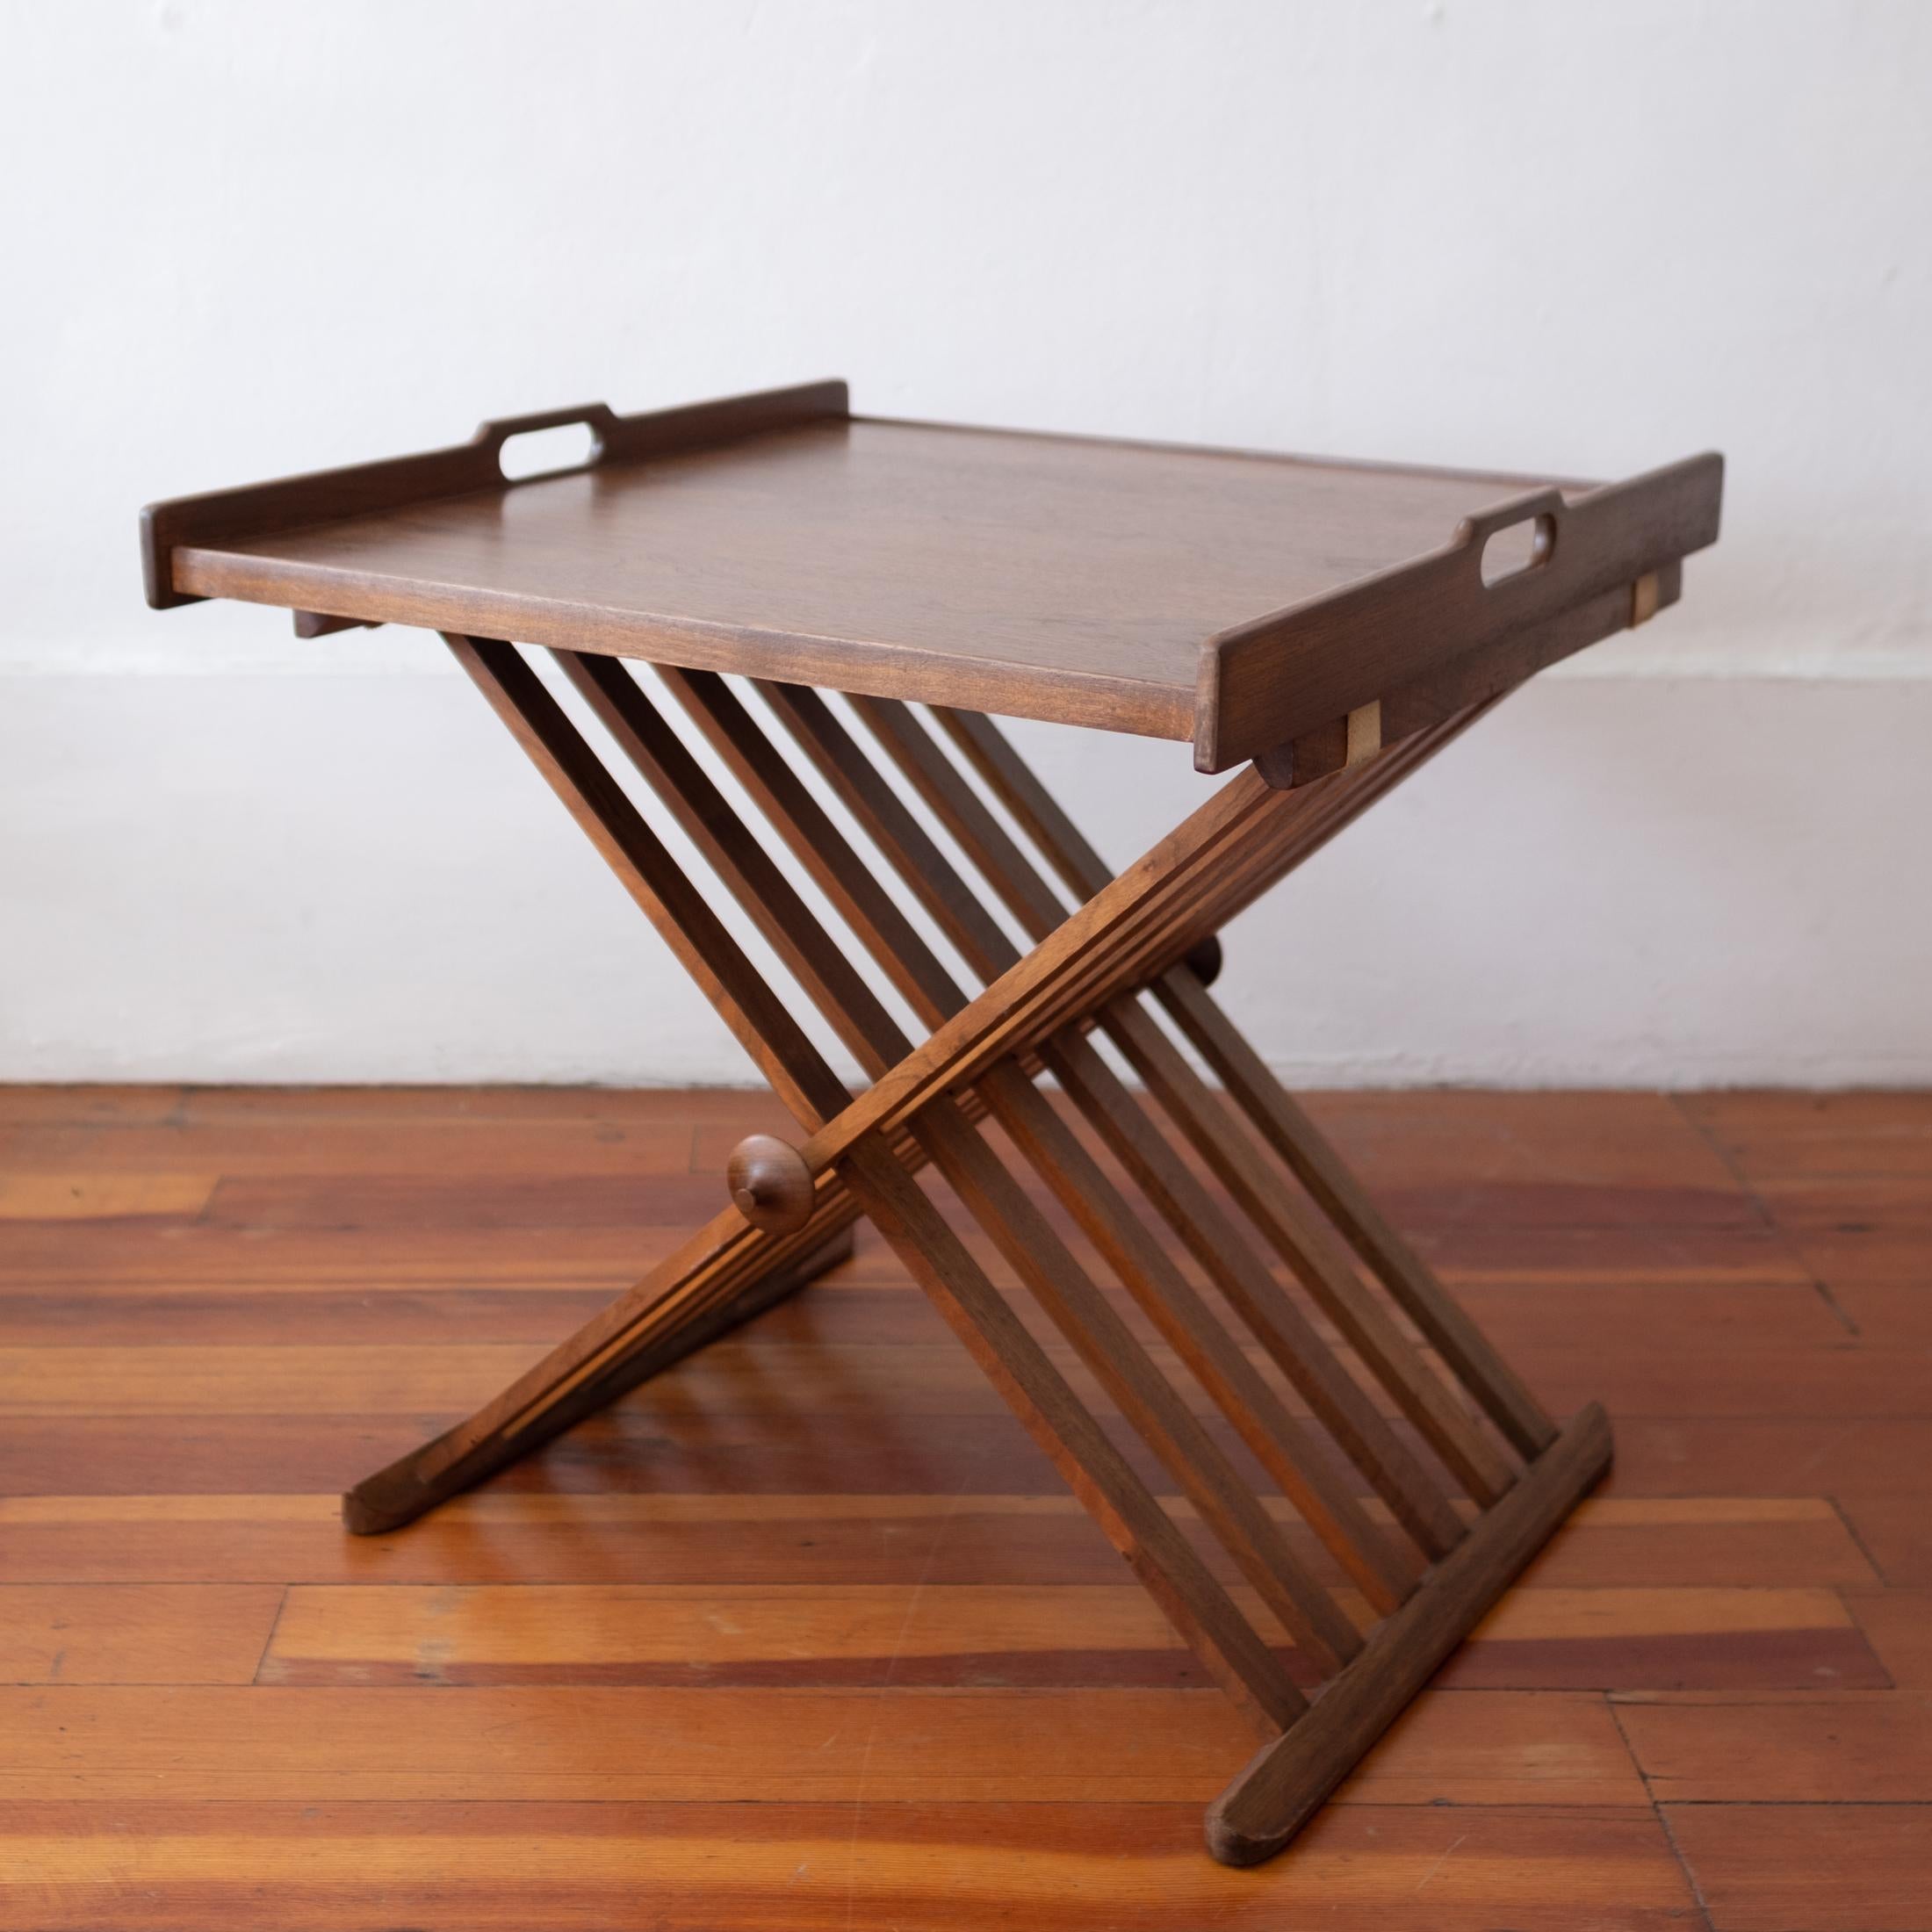 Folding Campaign tray table by Kipp Stewart and Stewart McDougall. Beautiful walnut grain. Labeled on the tray bottom.